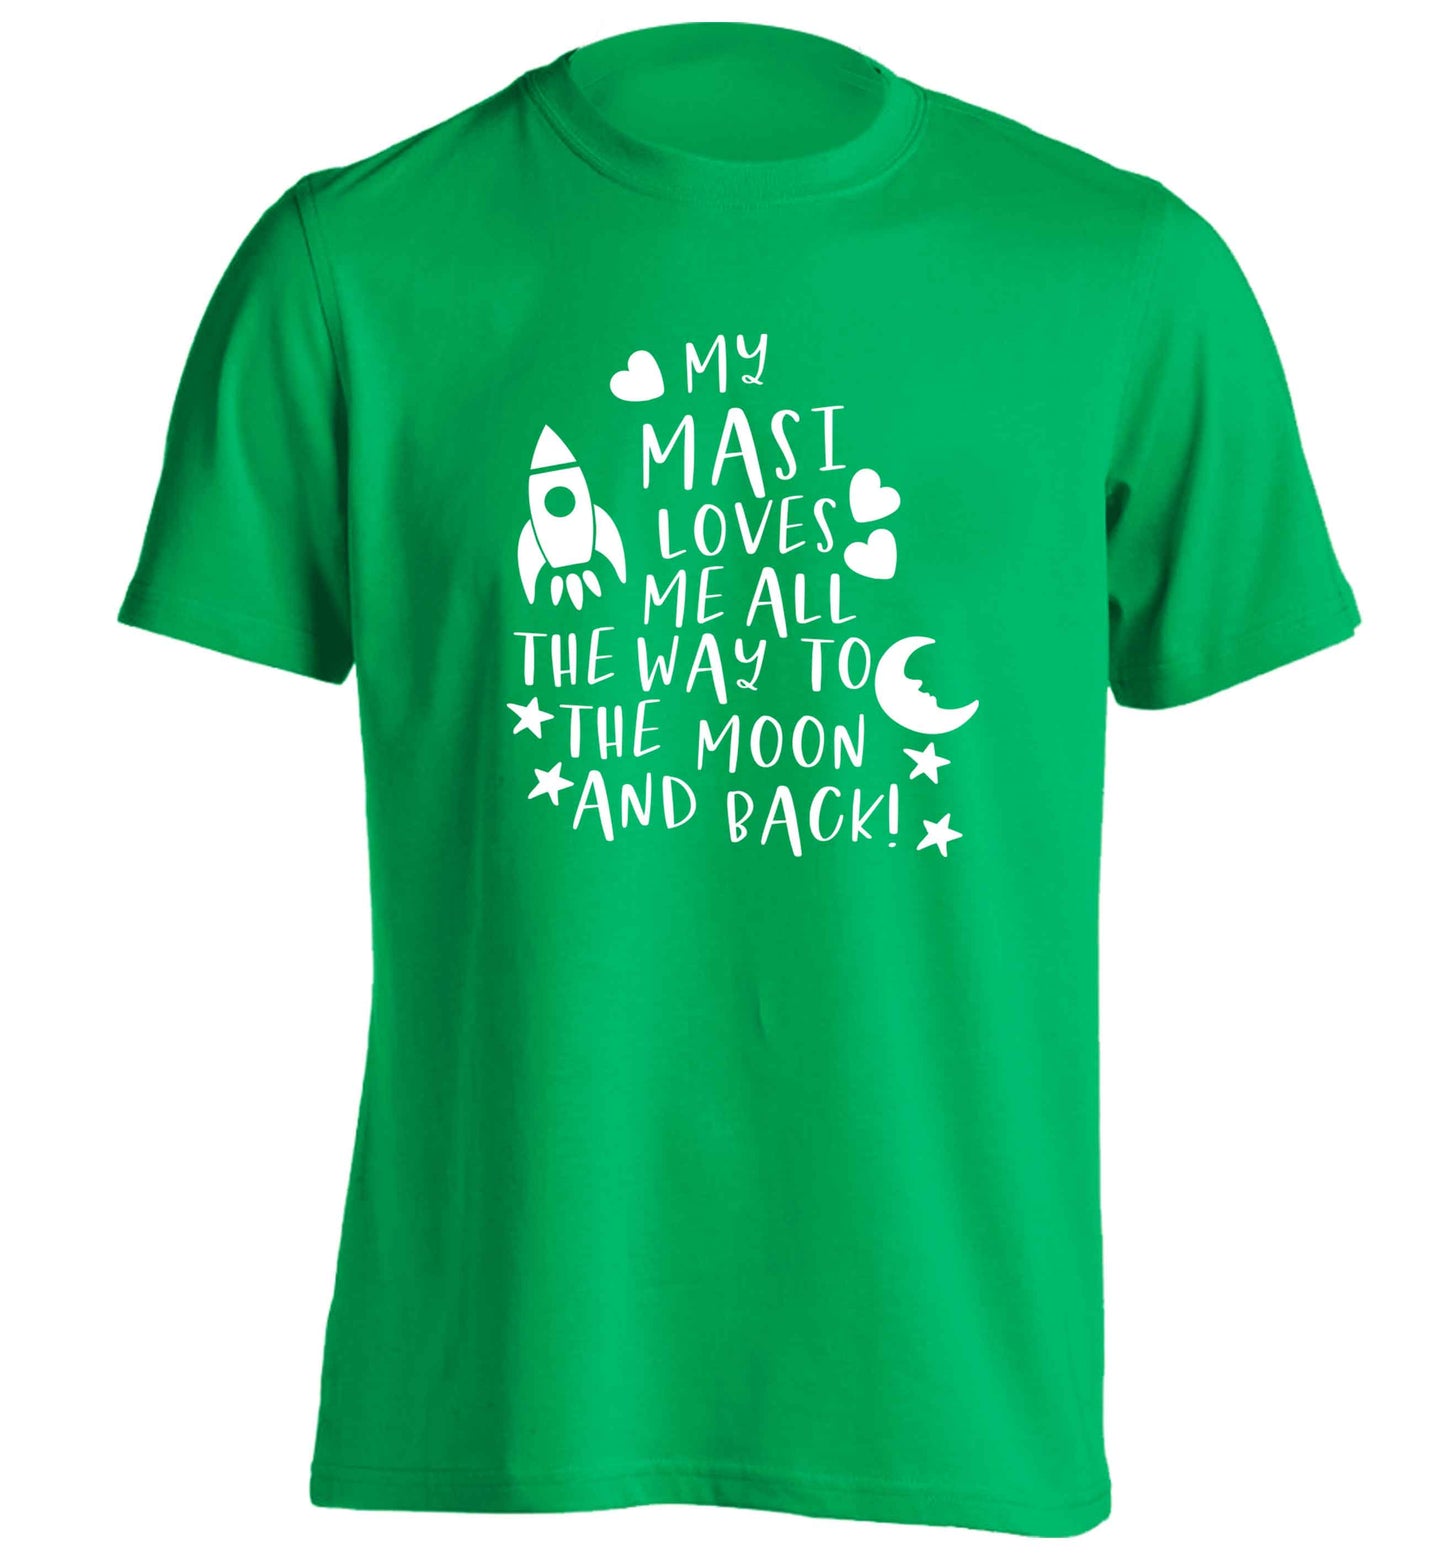 My masi loves me all the way to the moon and back adults unisex green Tshirt 2XL